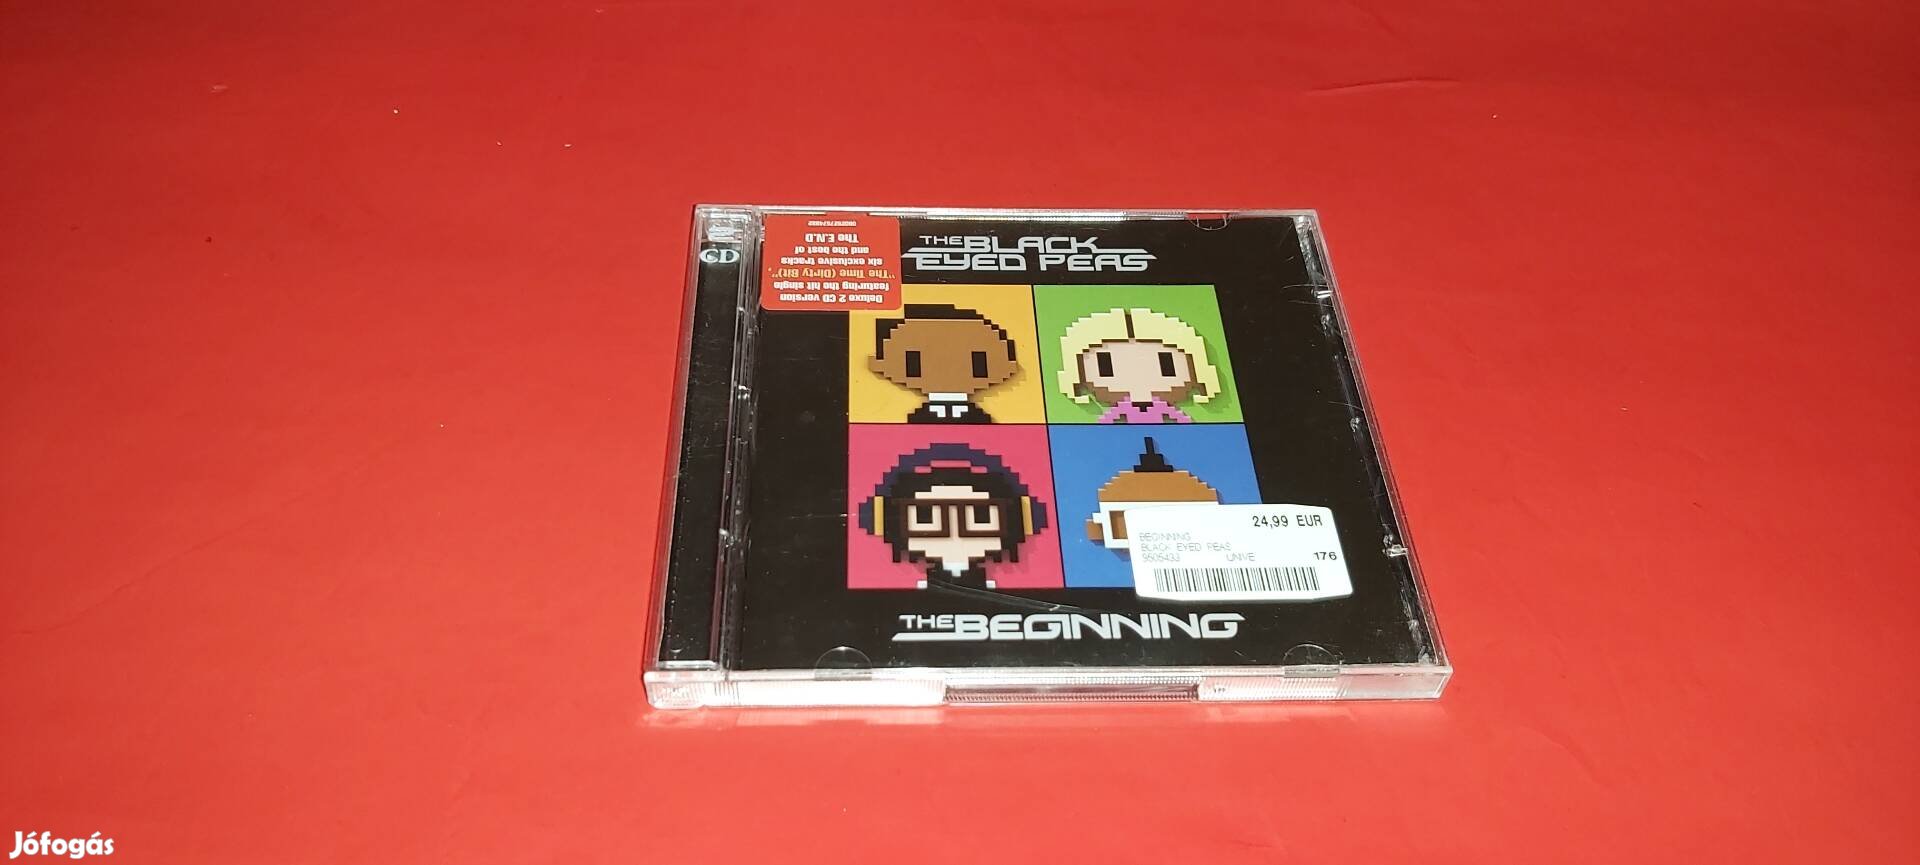 The Black Eyed Peas The beginning Deluxe Edition dupla Cd 2010